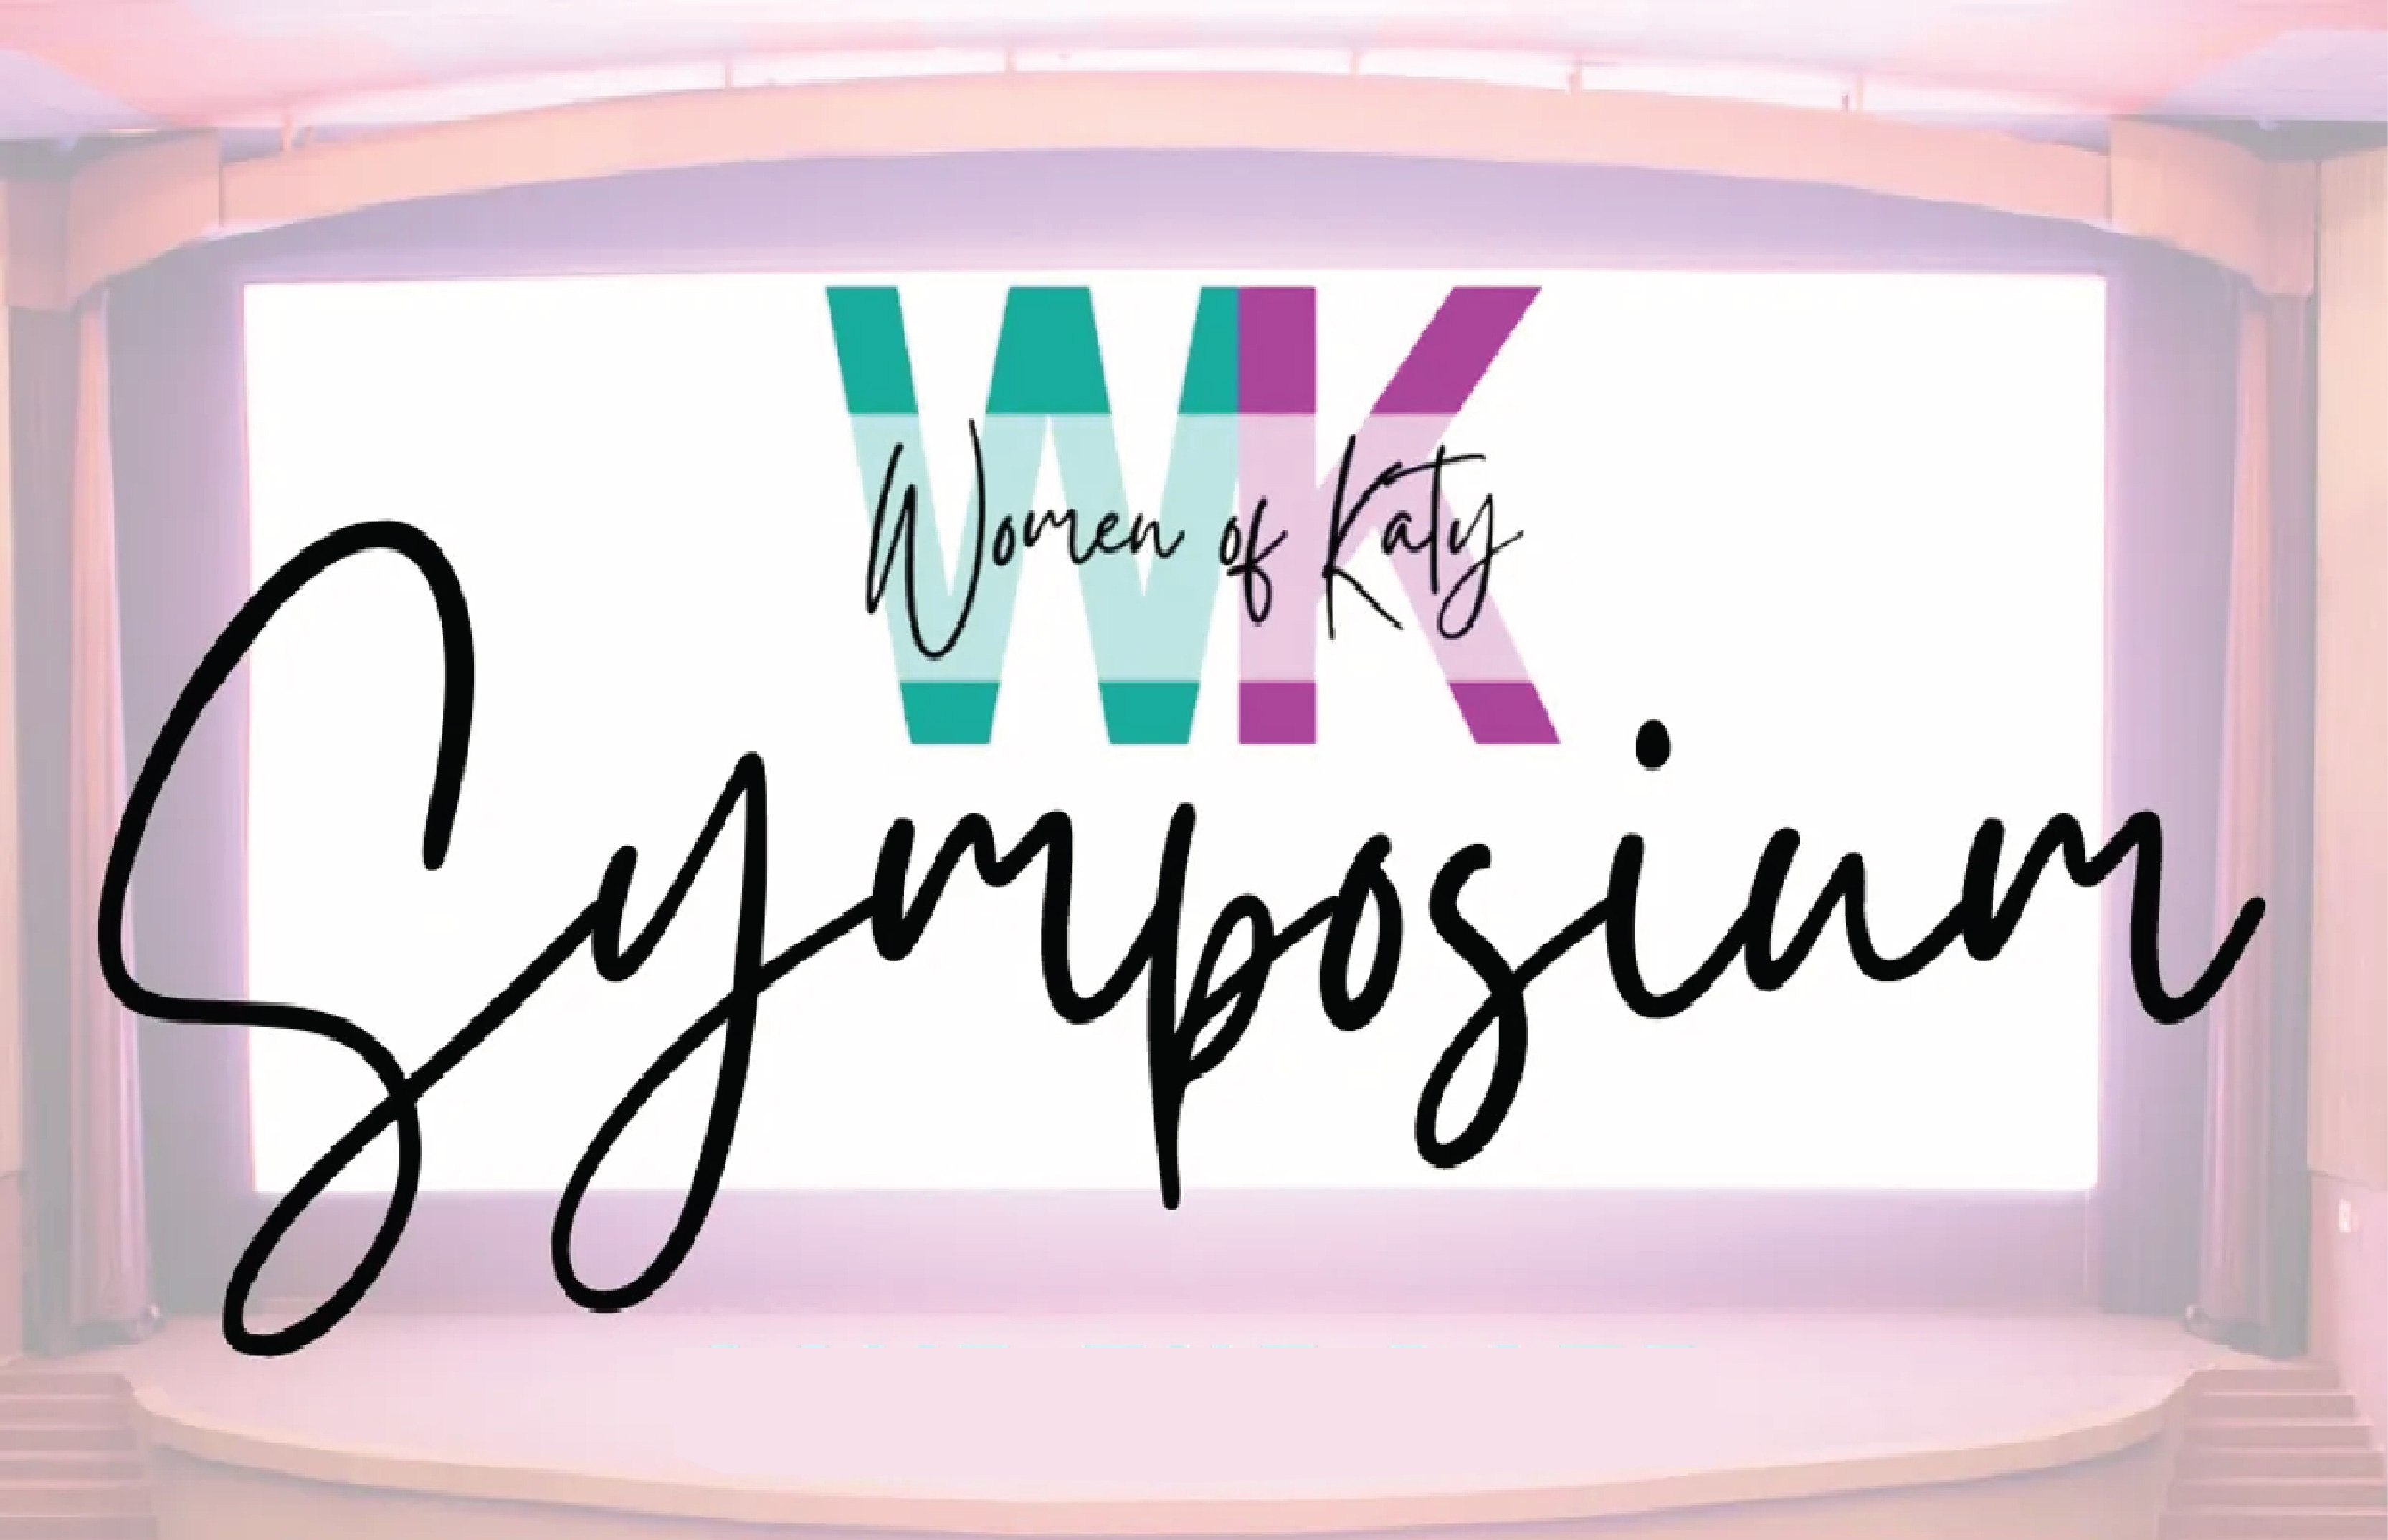 Women of Katy Symposium: Empowering Women in Business and Community